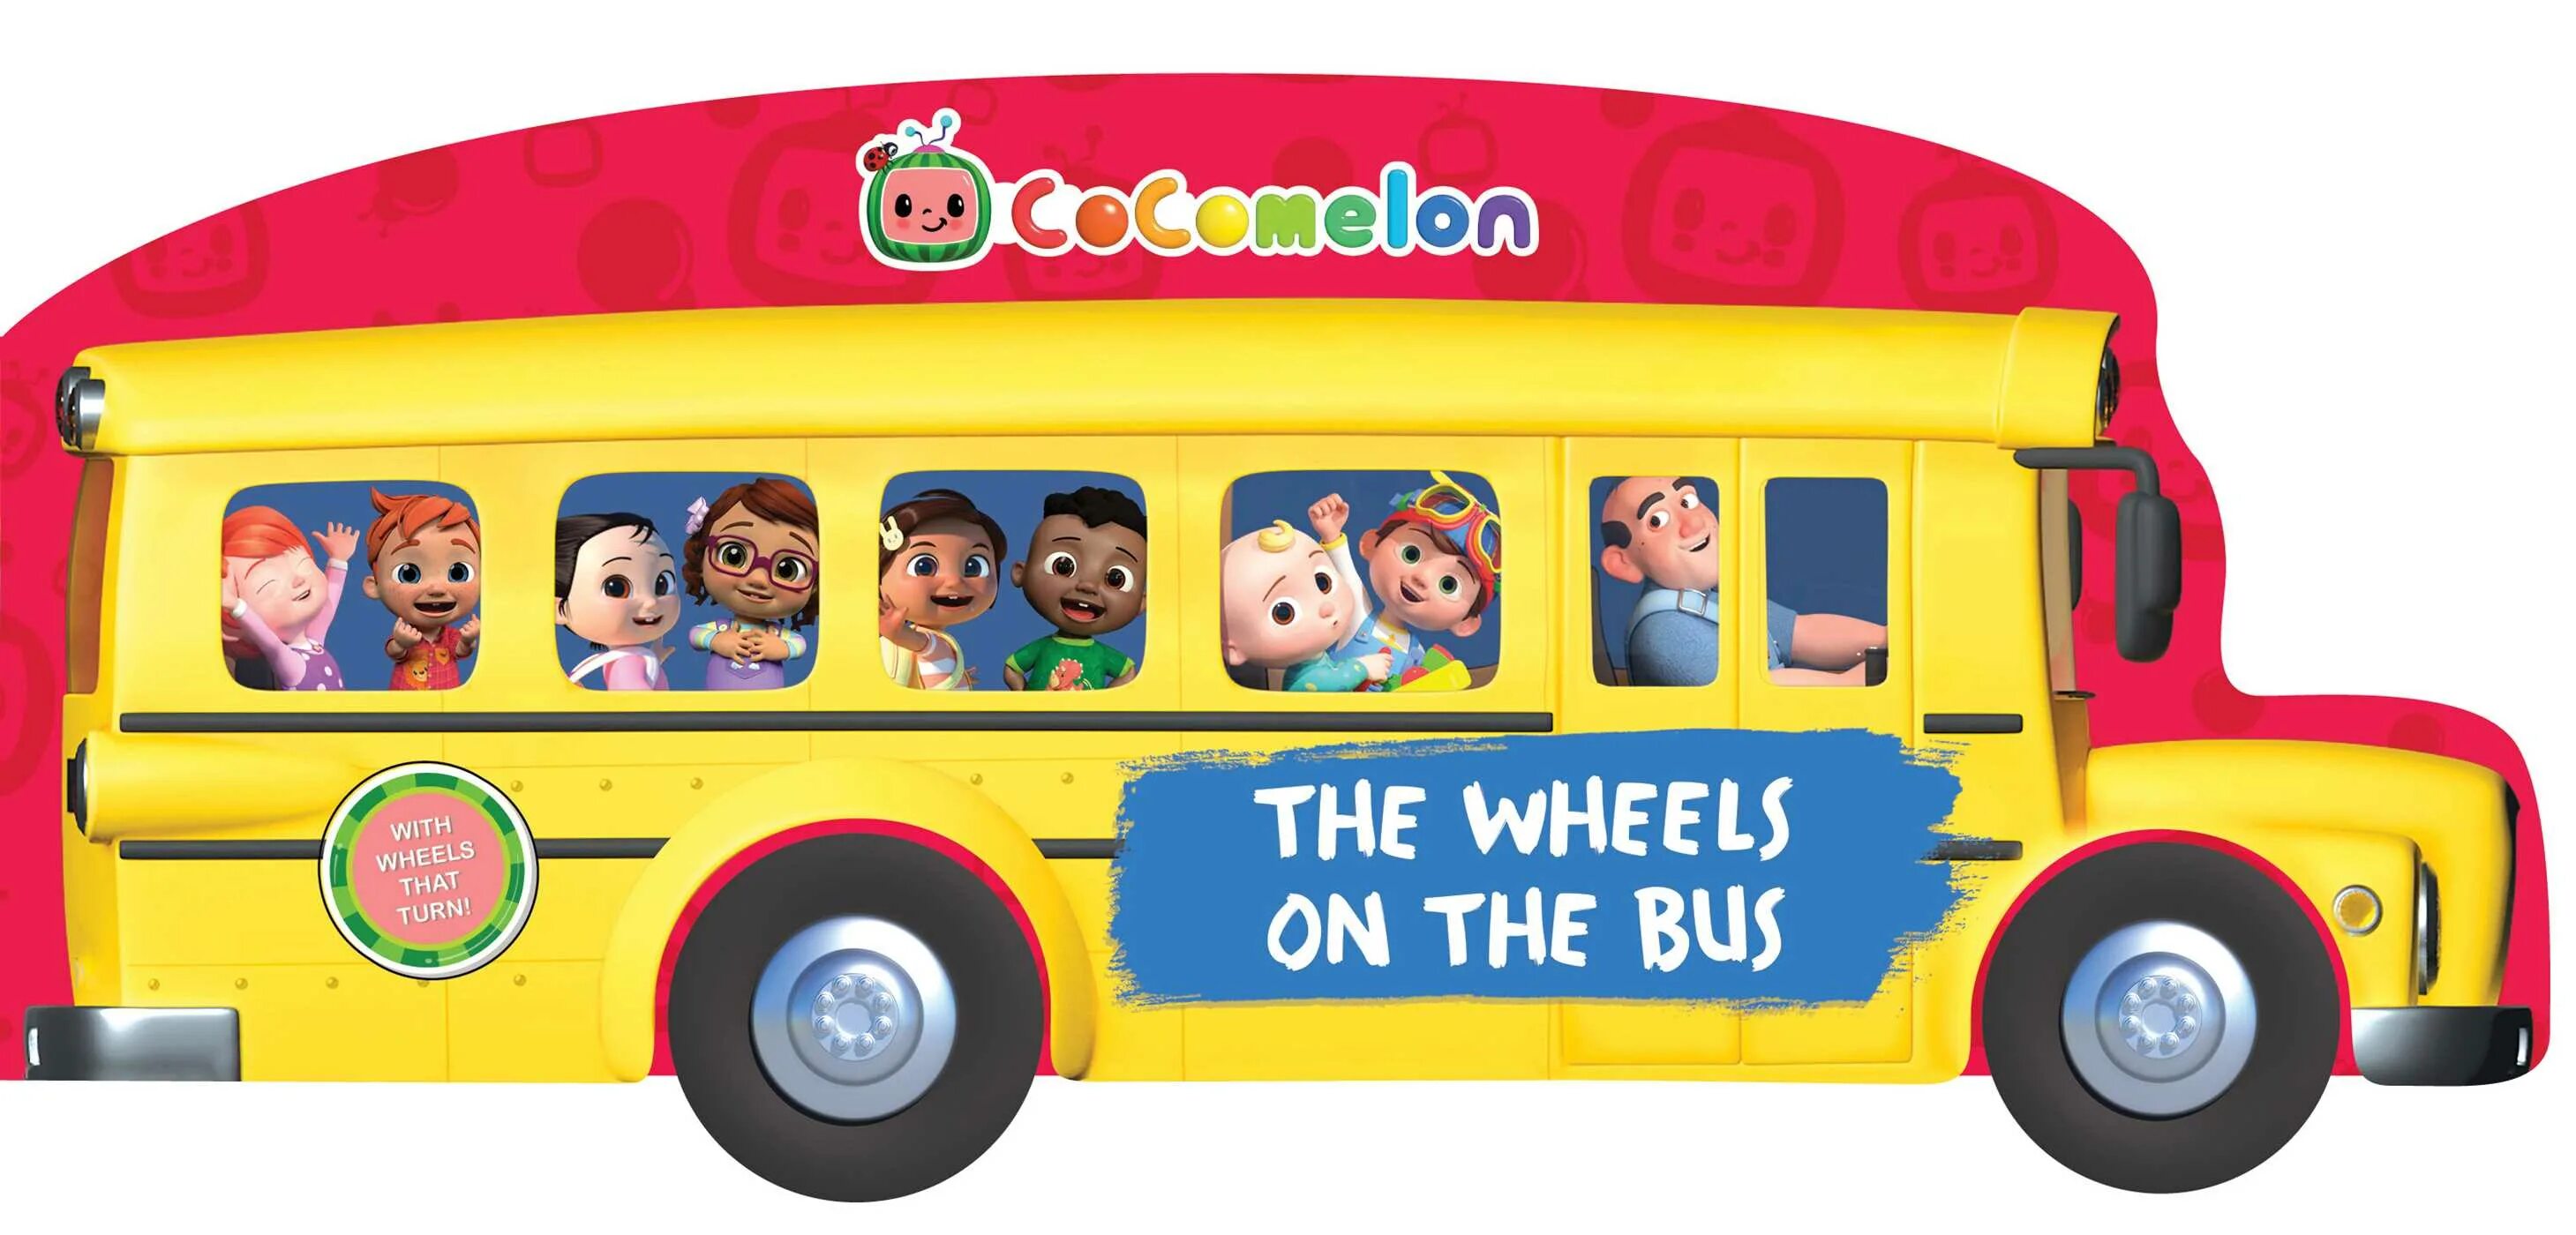 Round and round train. The Wheels on the Bus Cocomelon. Wheels on the Bus Cocomelon Nursery. Cocomelon автобус. Школьный автобус.